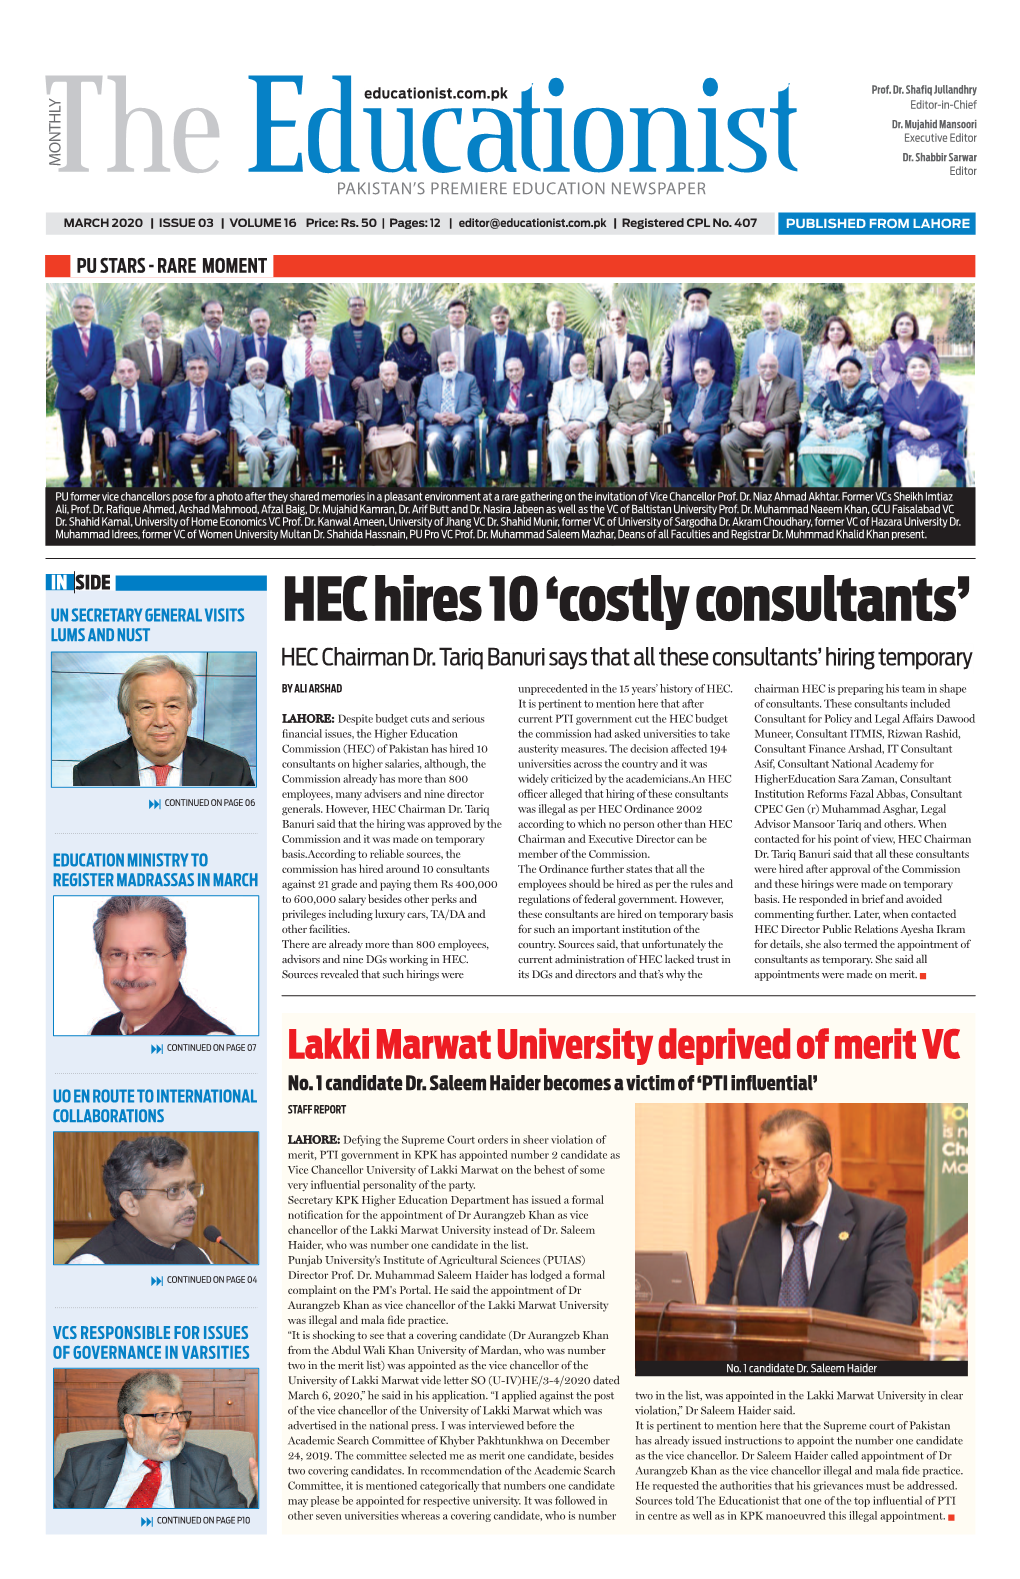 HEC Hires 10 'Costly Consultants'